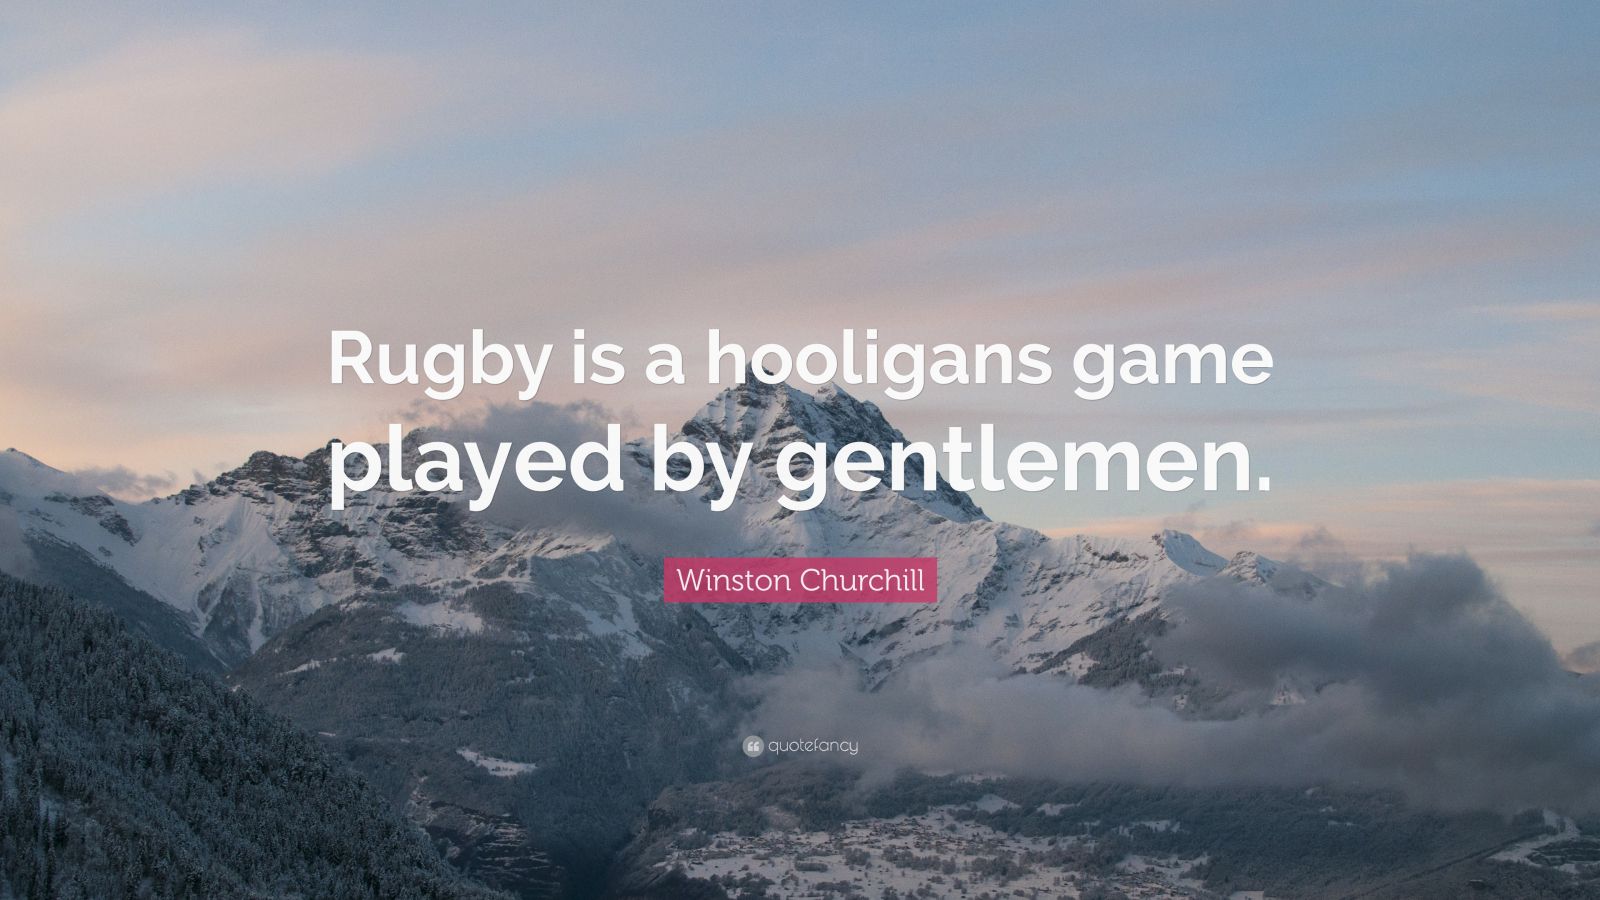 A Hooligans Game Played by Gentlemen - Major League Rugby